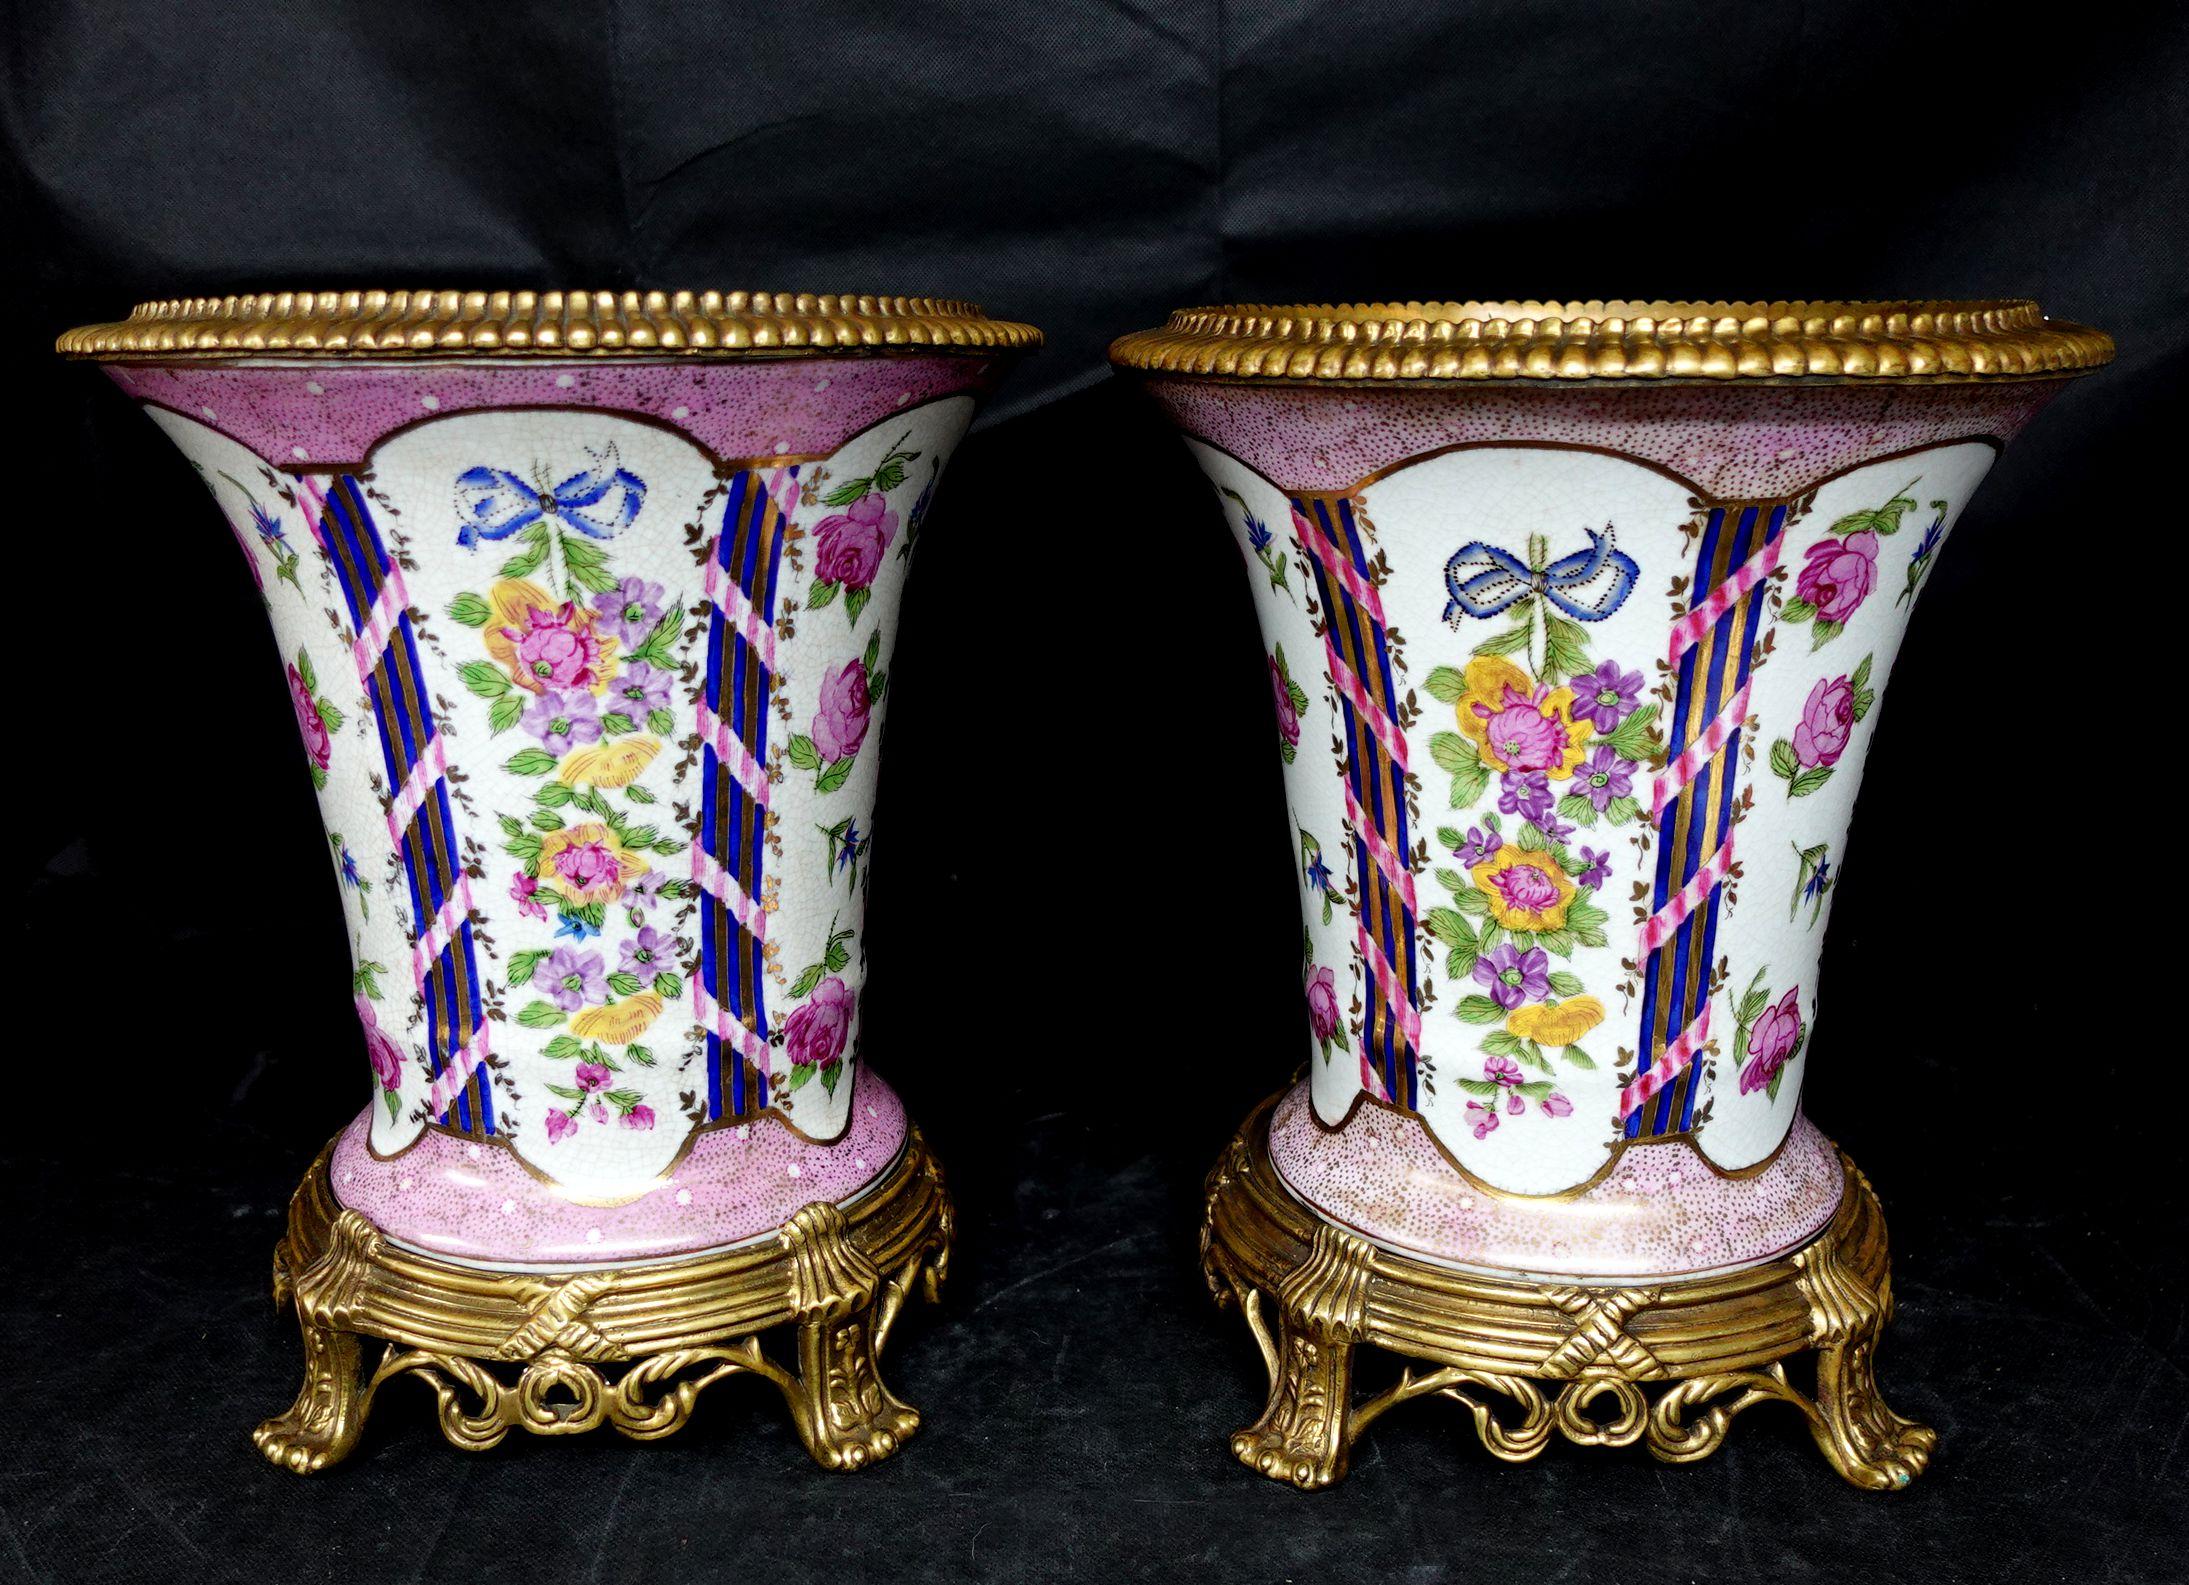 Pair of Porcelain Urns, having bronze rim and foot, 20th century, Oriental seal mark on the bottoms, height 12 1/2 inches.
 Ric071.